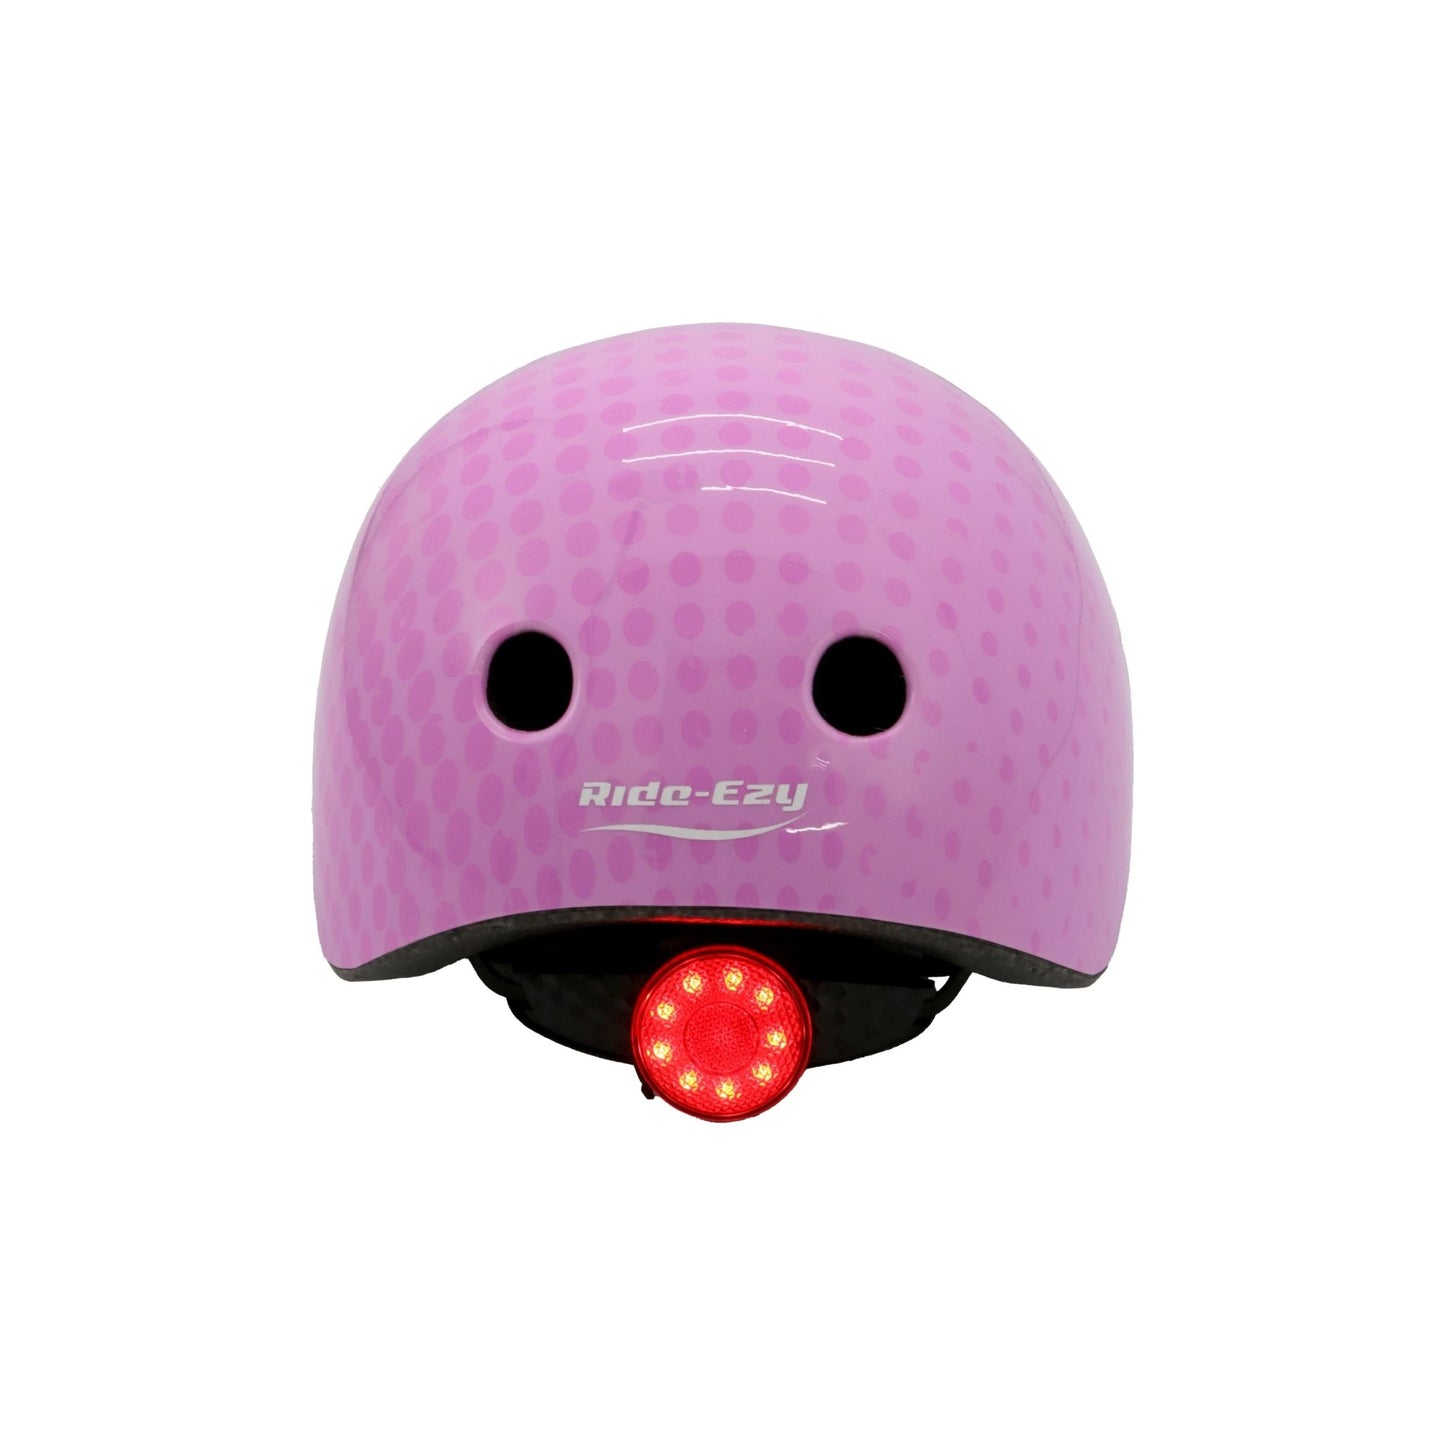 Ride-Ezy Hector 48-53cms Kids Helmet - Blossom rear with safety light